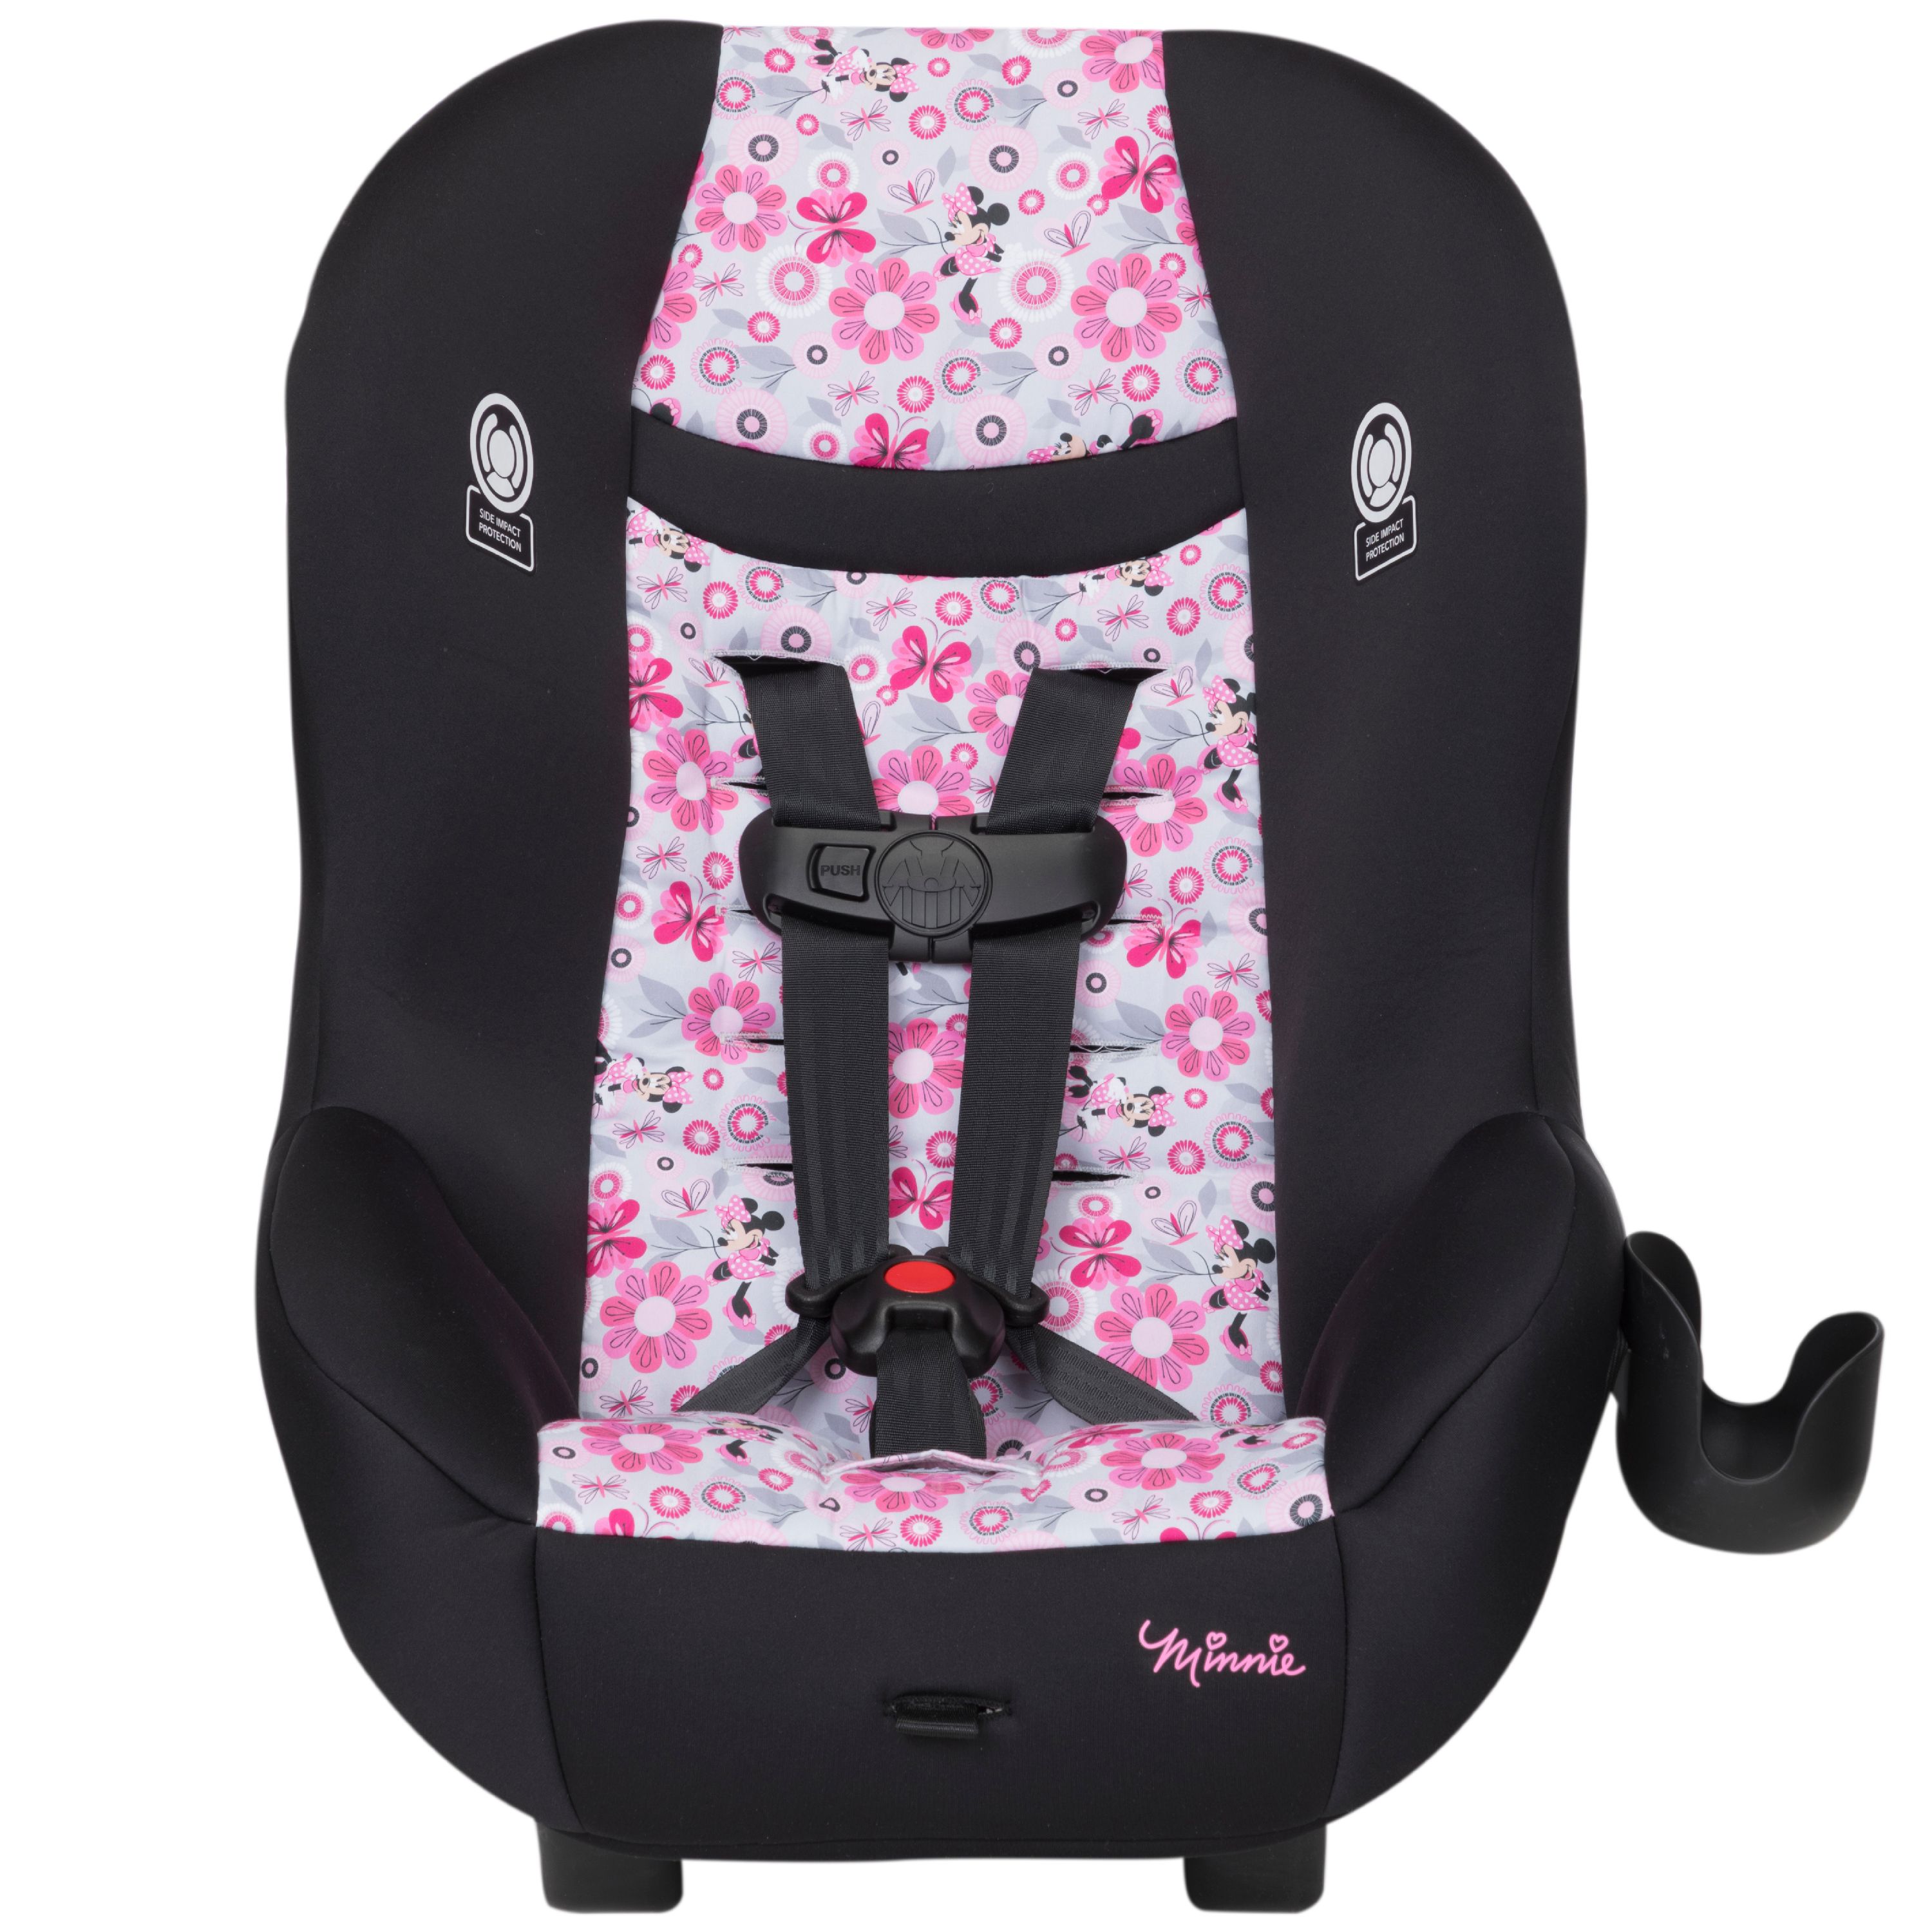 Disney Baby Scenera NEXT Luxe Convertible Car Seat, Minnie Meadow - image 2 of 15